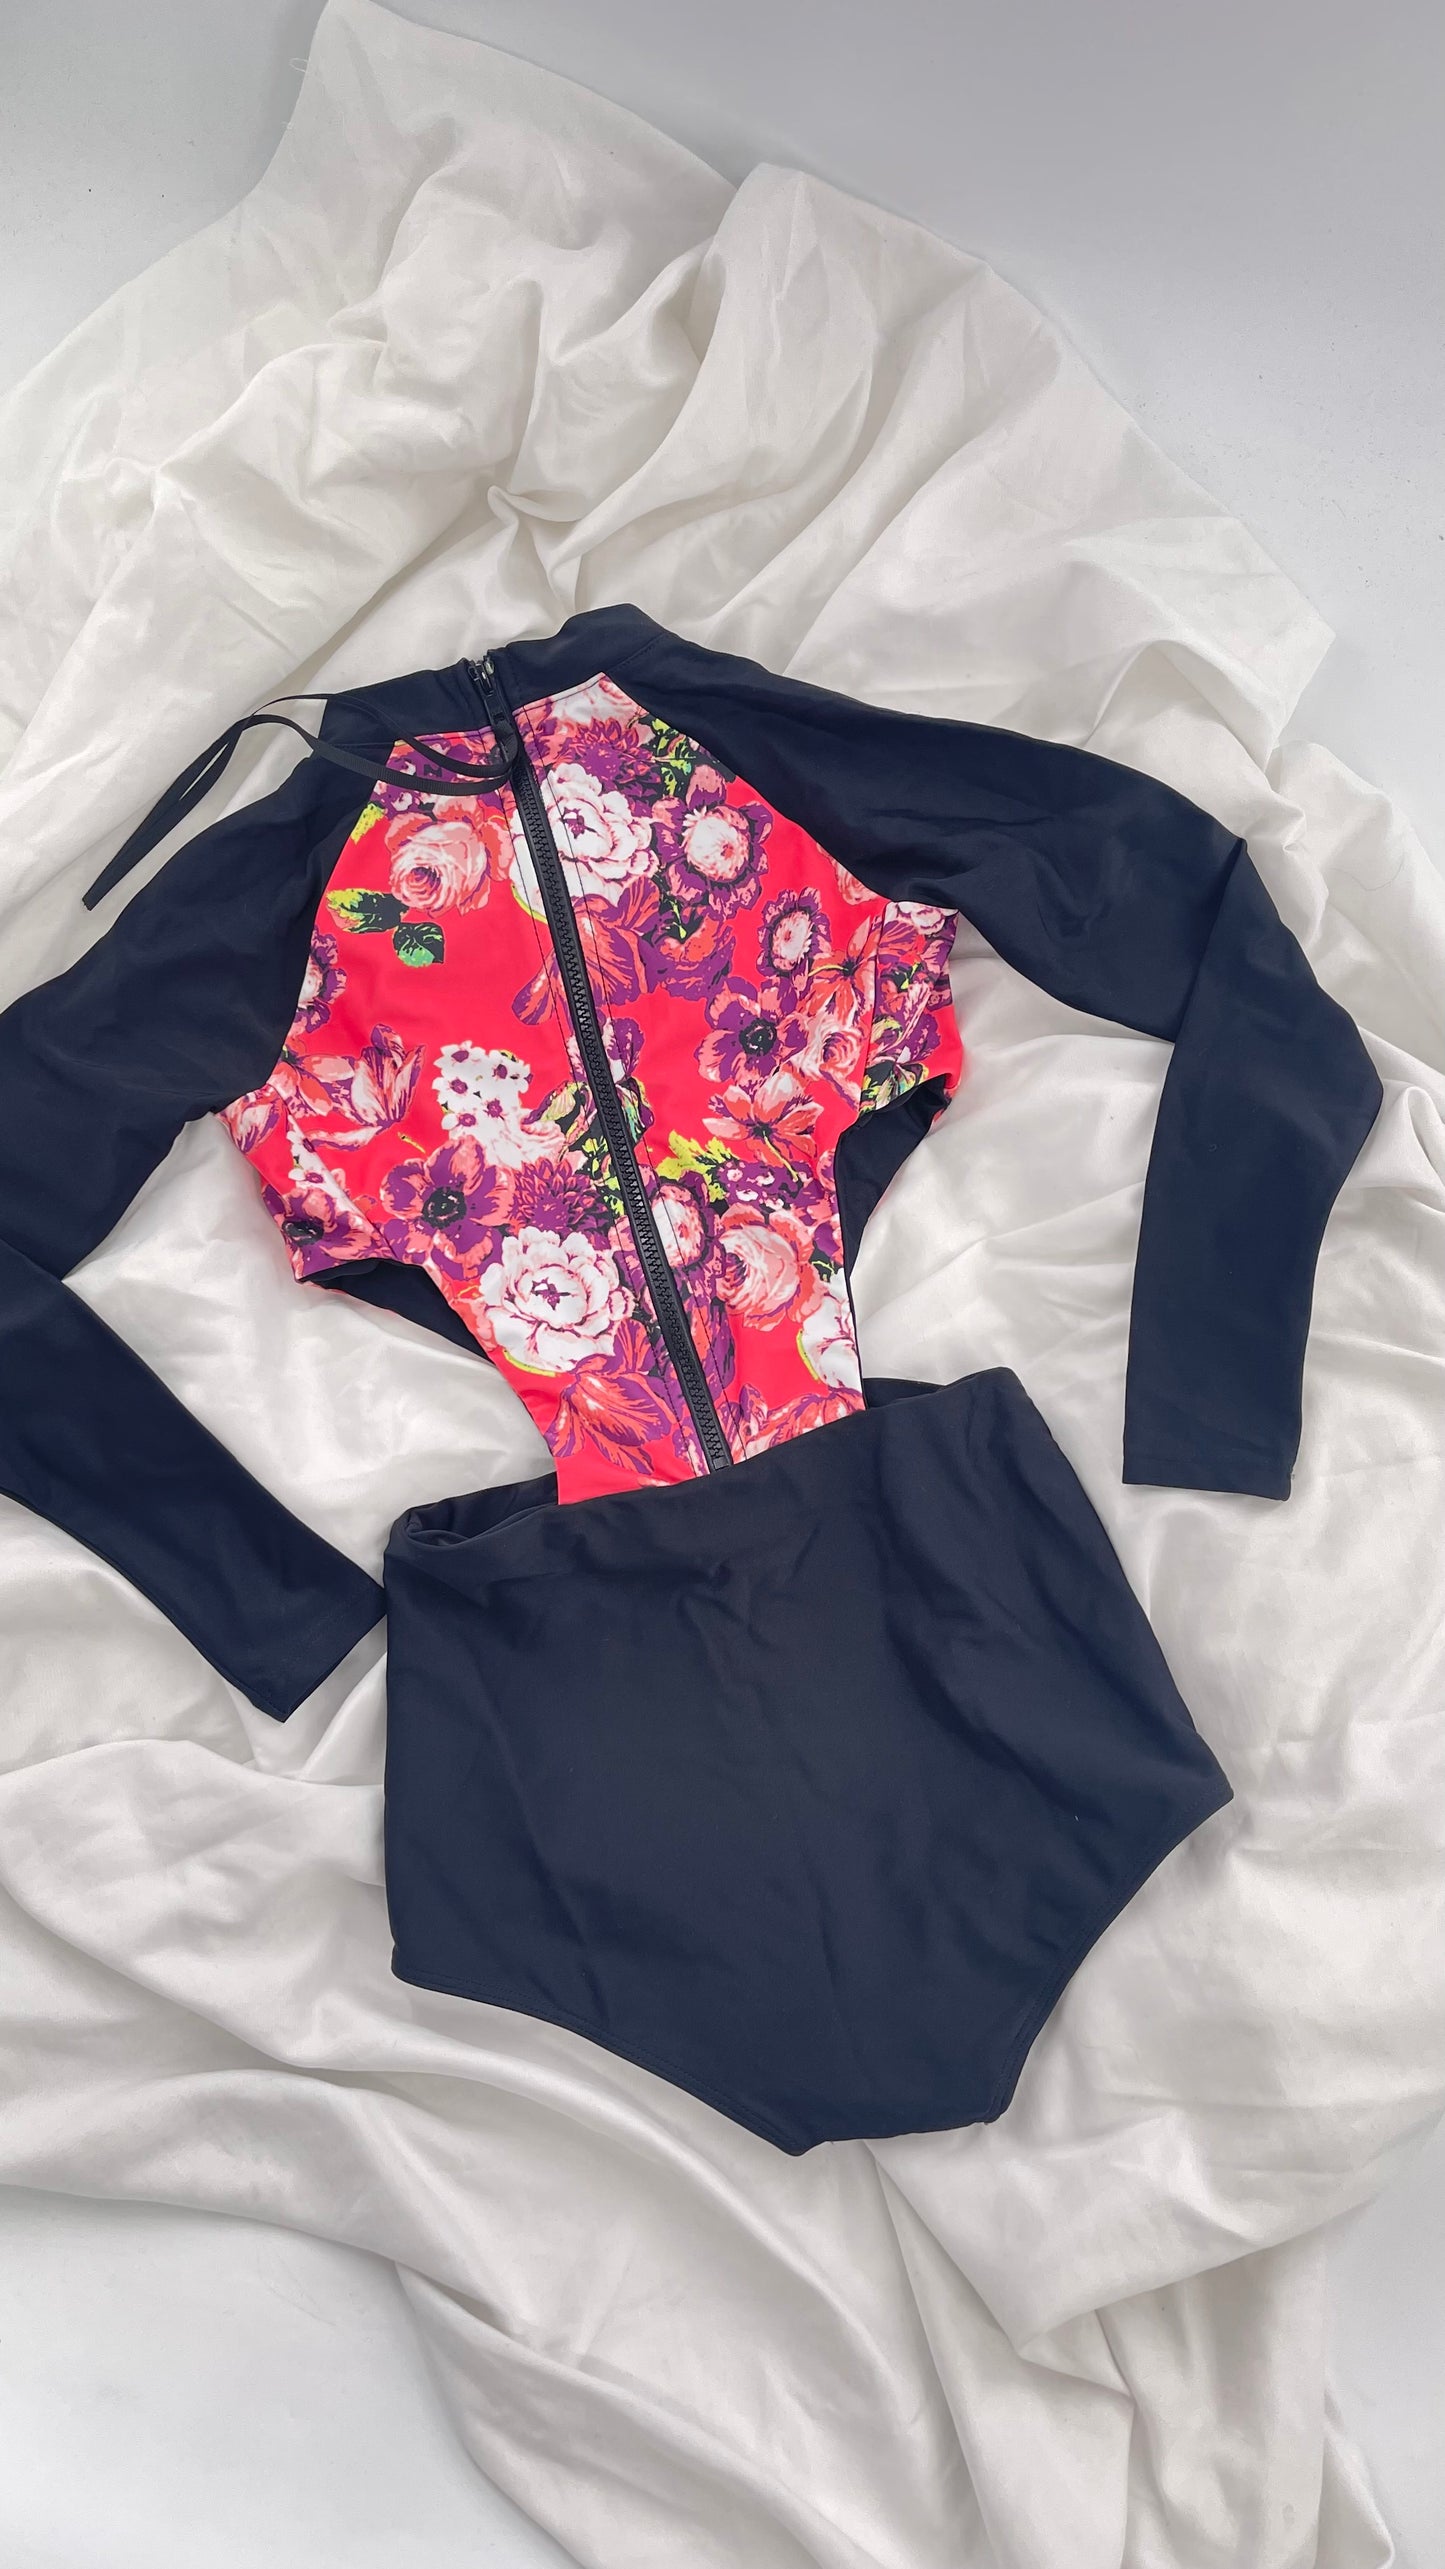 BEACH RIOT x Free People Black Long Sleeve Swimsuit with Hot Pink Floral Torso and Cut Outs (XS)